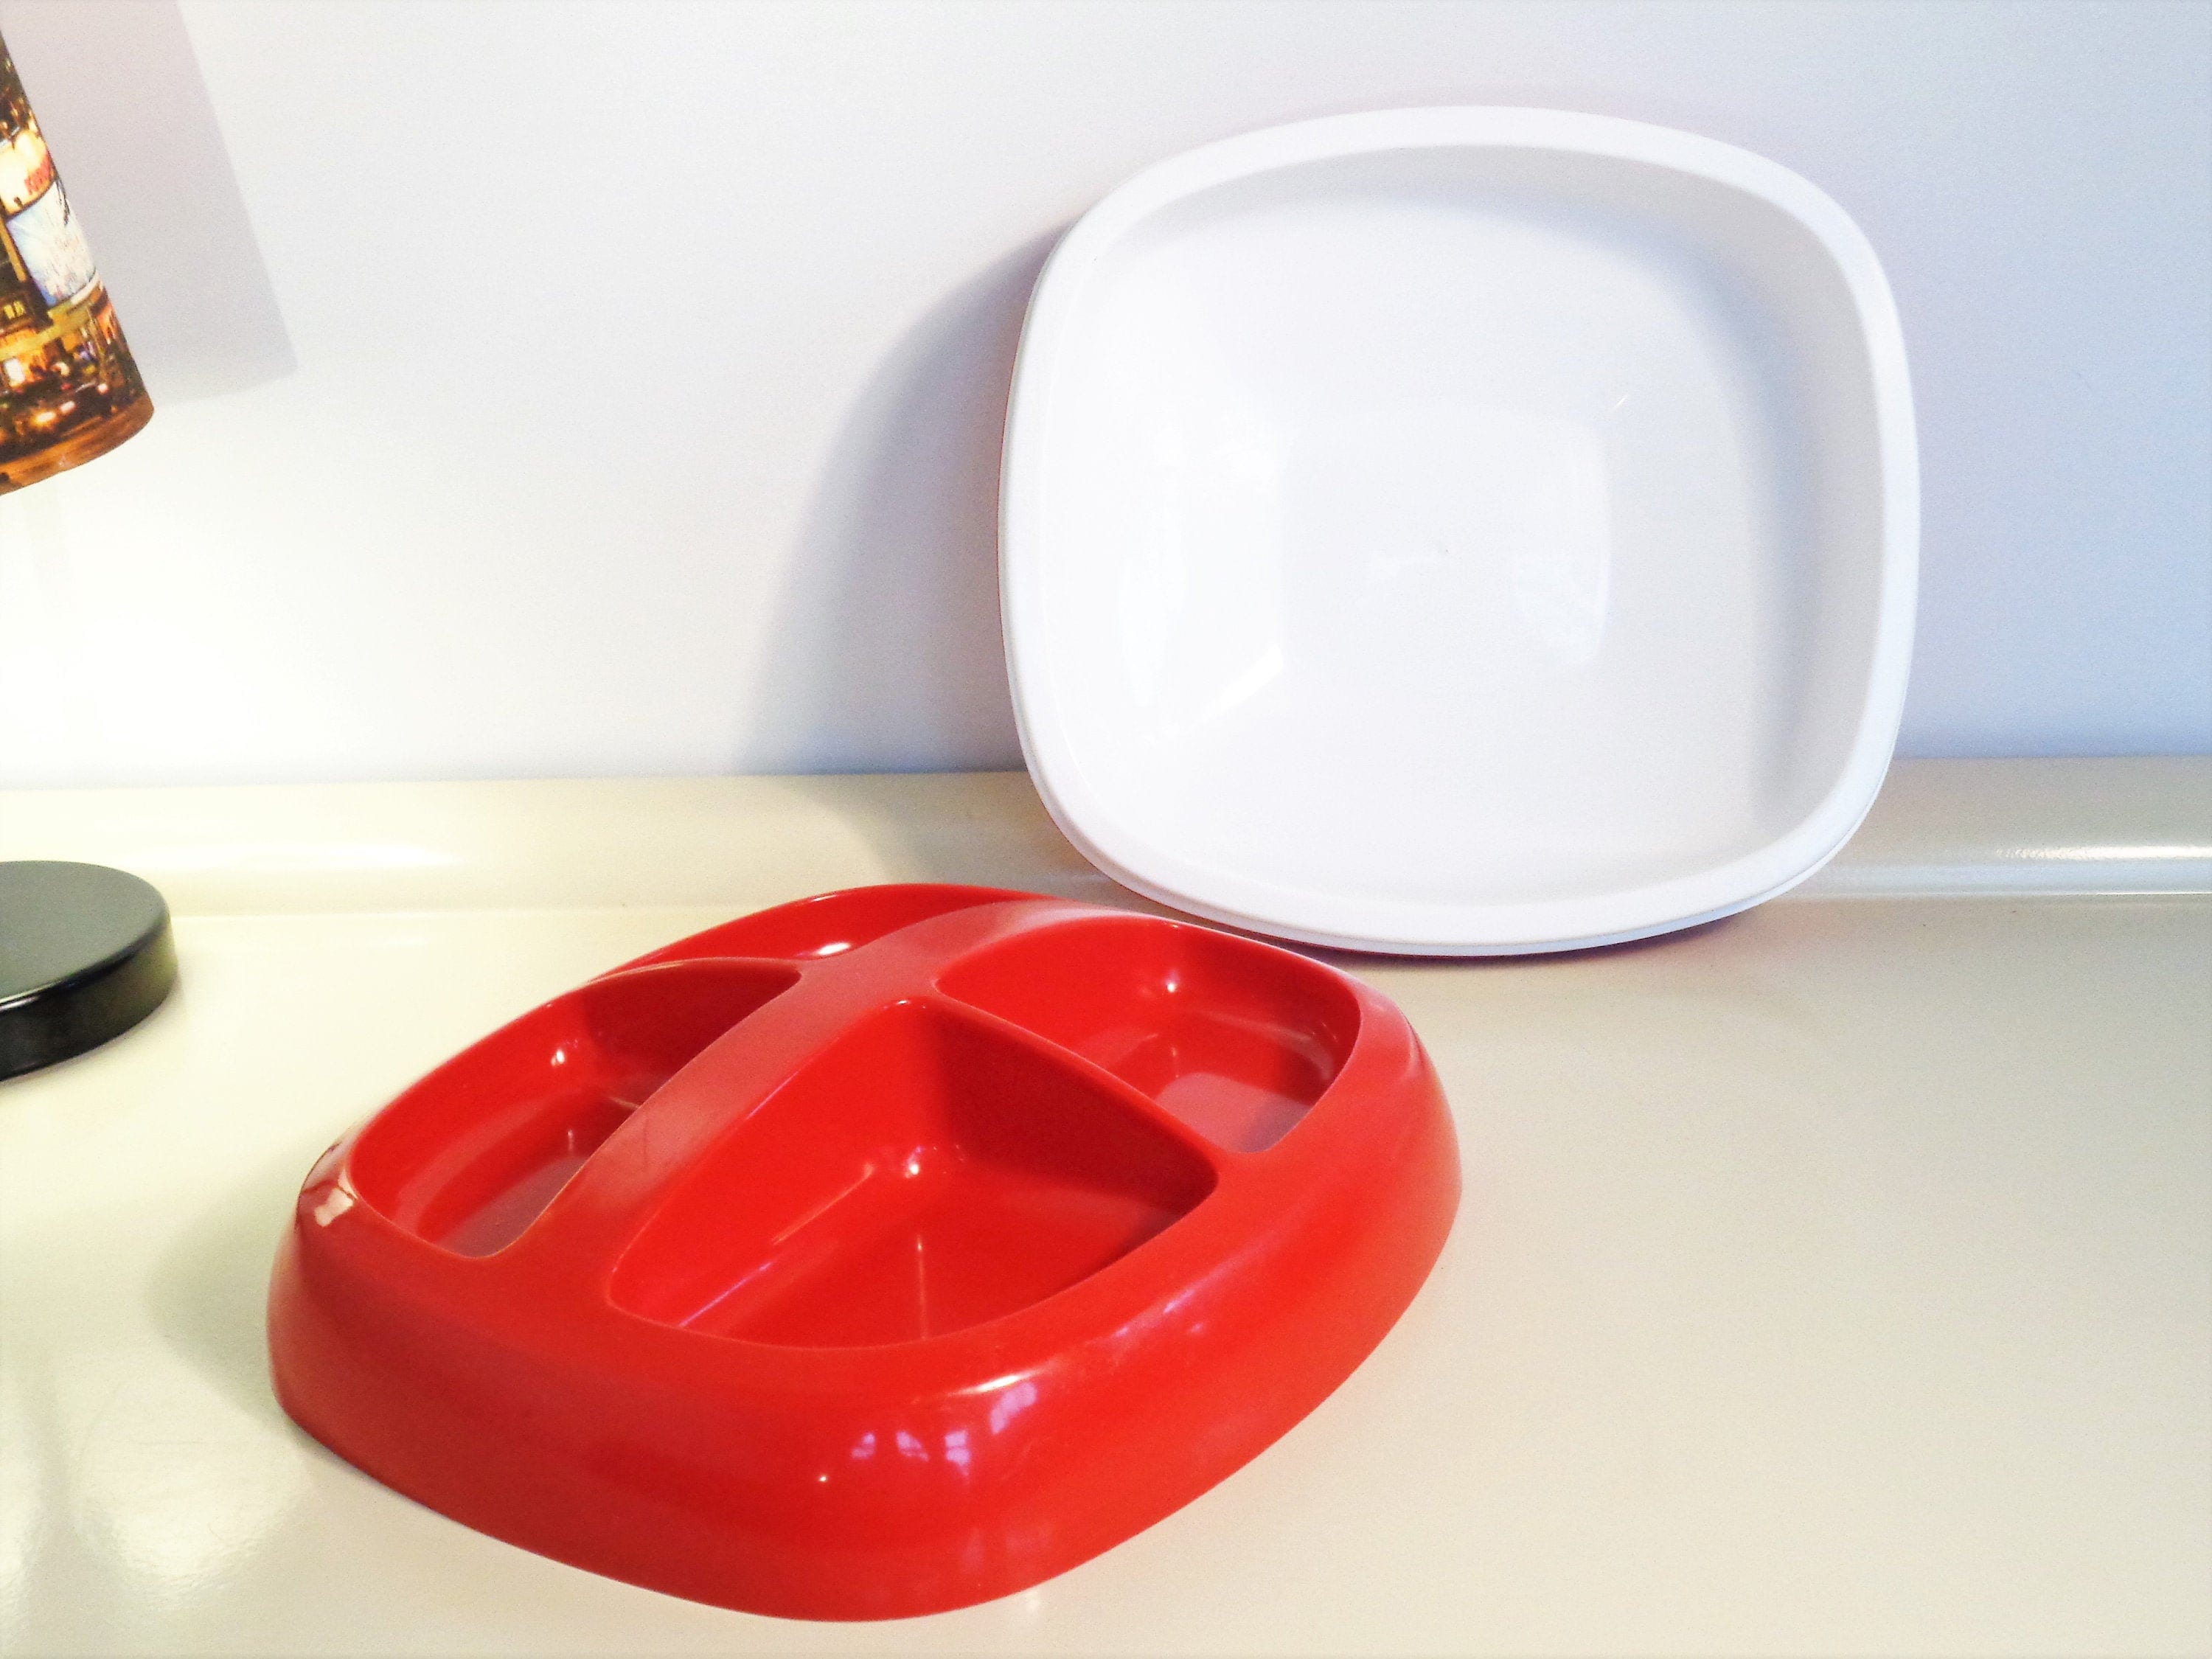 Vintage Snack Server, Plastic Serving Bowl On Ice With Tray Cover, Retro & Cube Bucket Set, Divided Tray, Red Color, 70S